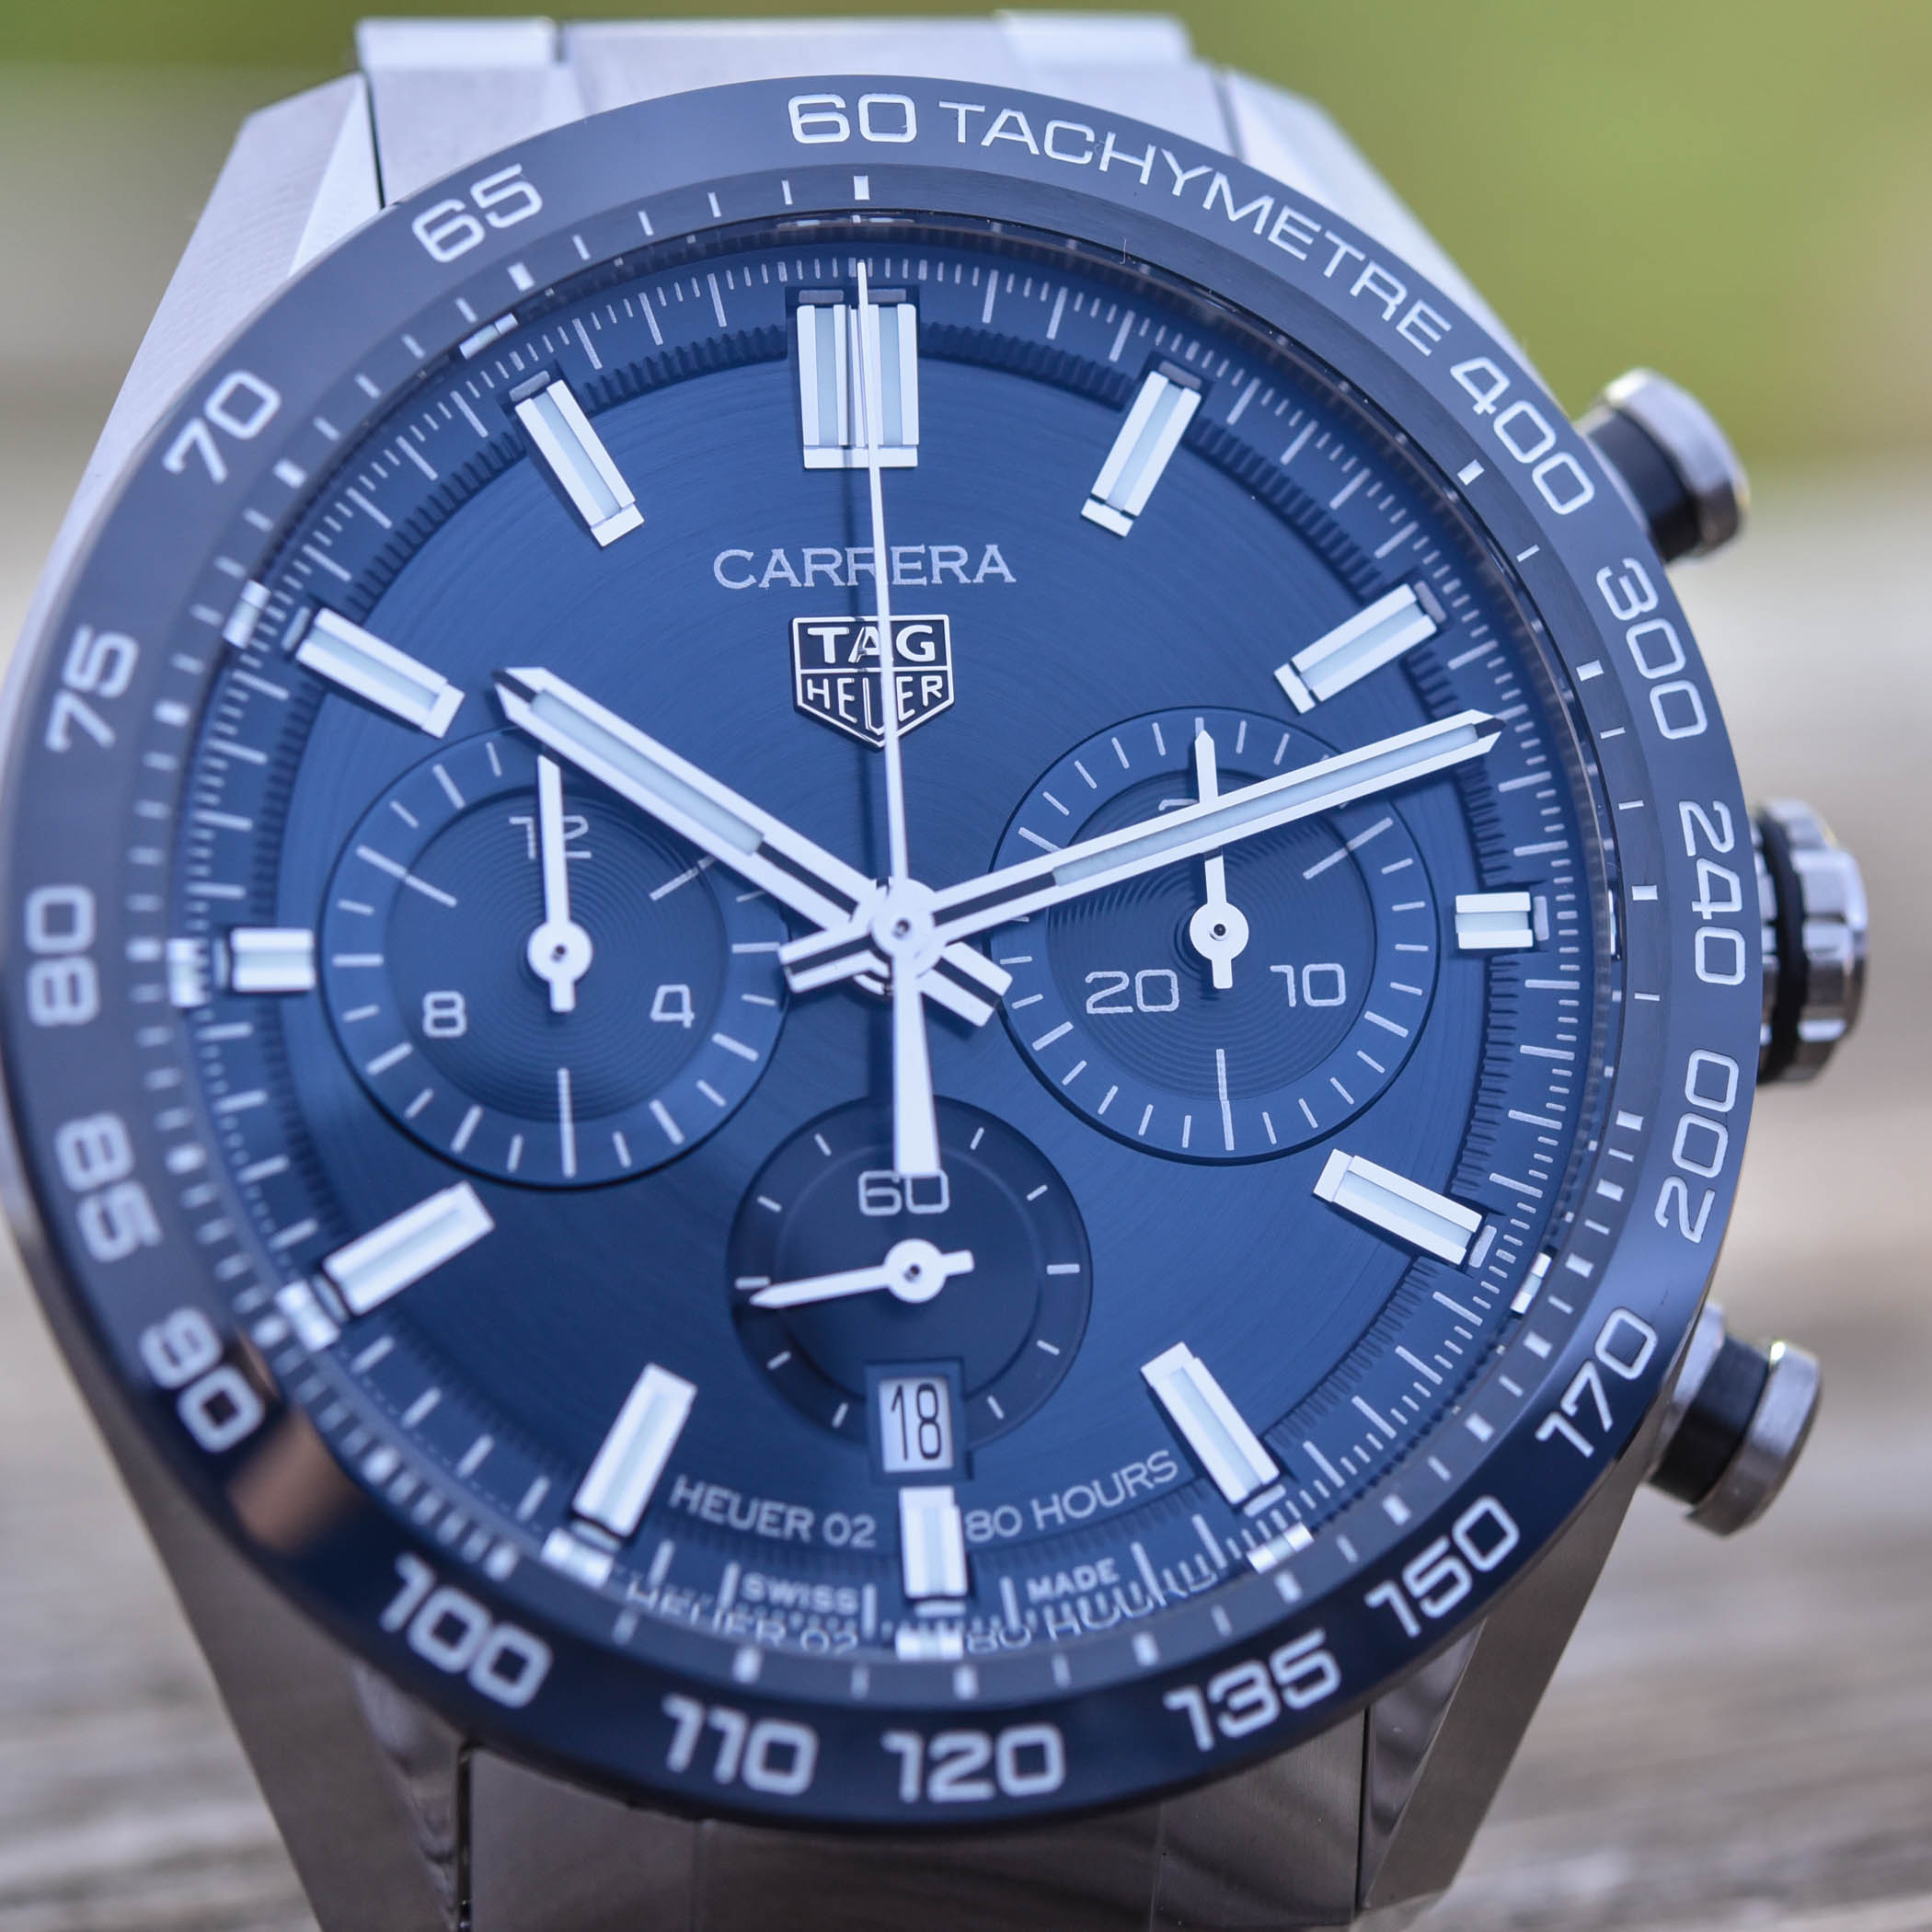 2020 TAG Heuer Carrera Sport Chronograph 44mm Collection - 5